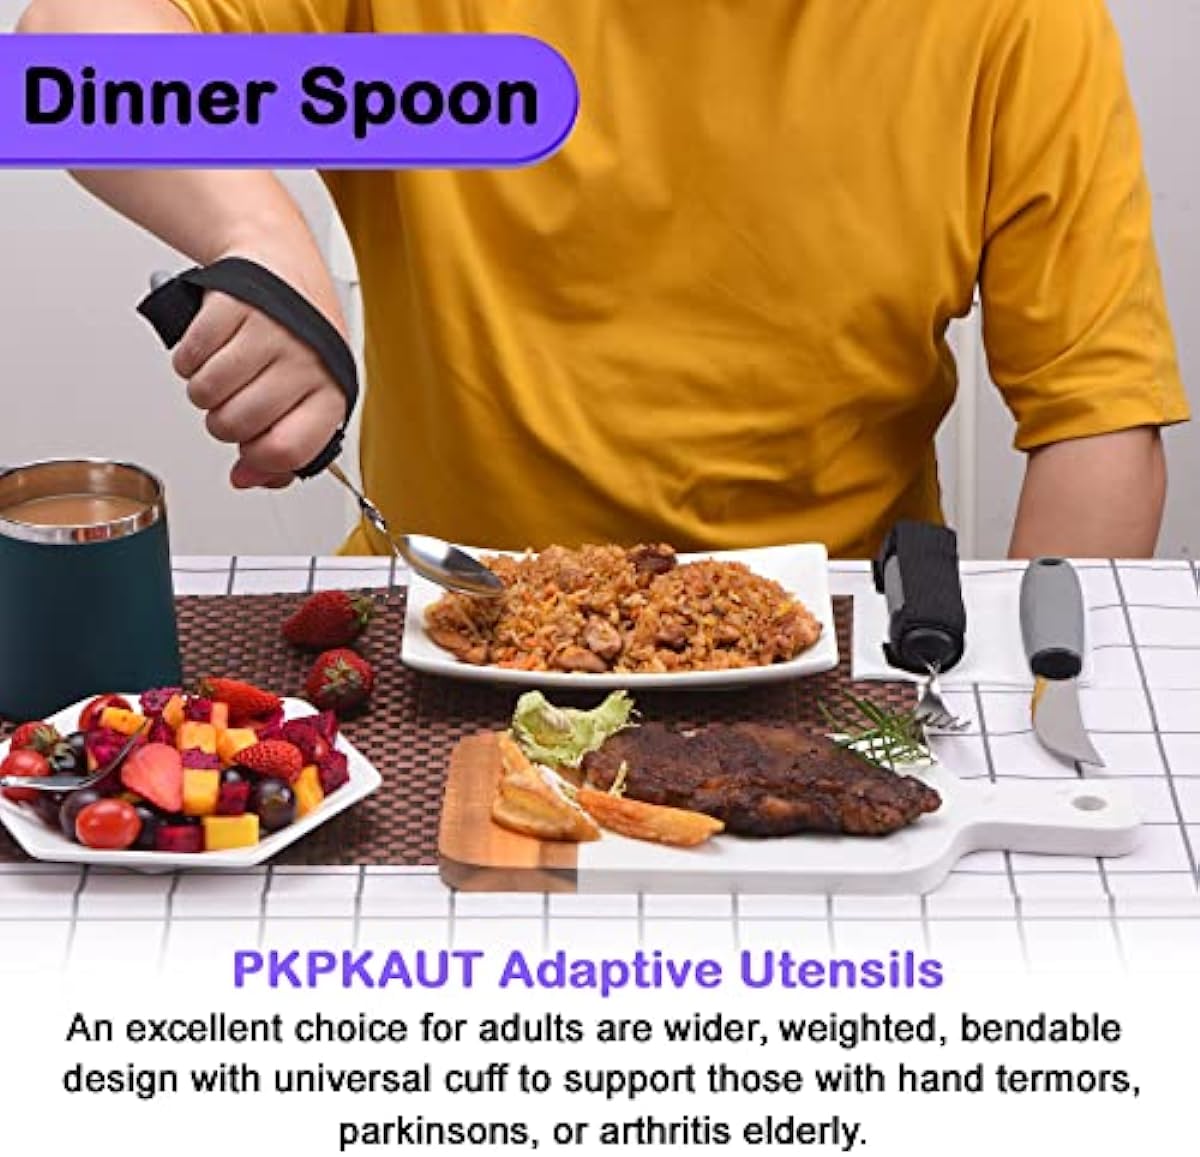 PKPKAUT Bendable/Weighted Spoon for Hand Tremors, Adaptive Handicap Spoon for Parkinsons Patients, Parkinson Curved Spoon for Shaking Hands, Liftware Angled Arthritis Spoon for Adults Disabled Elderly